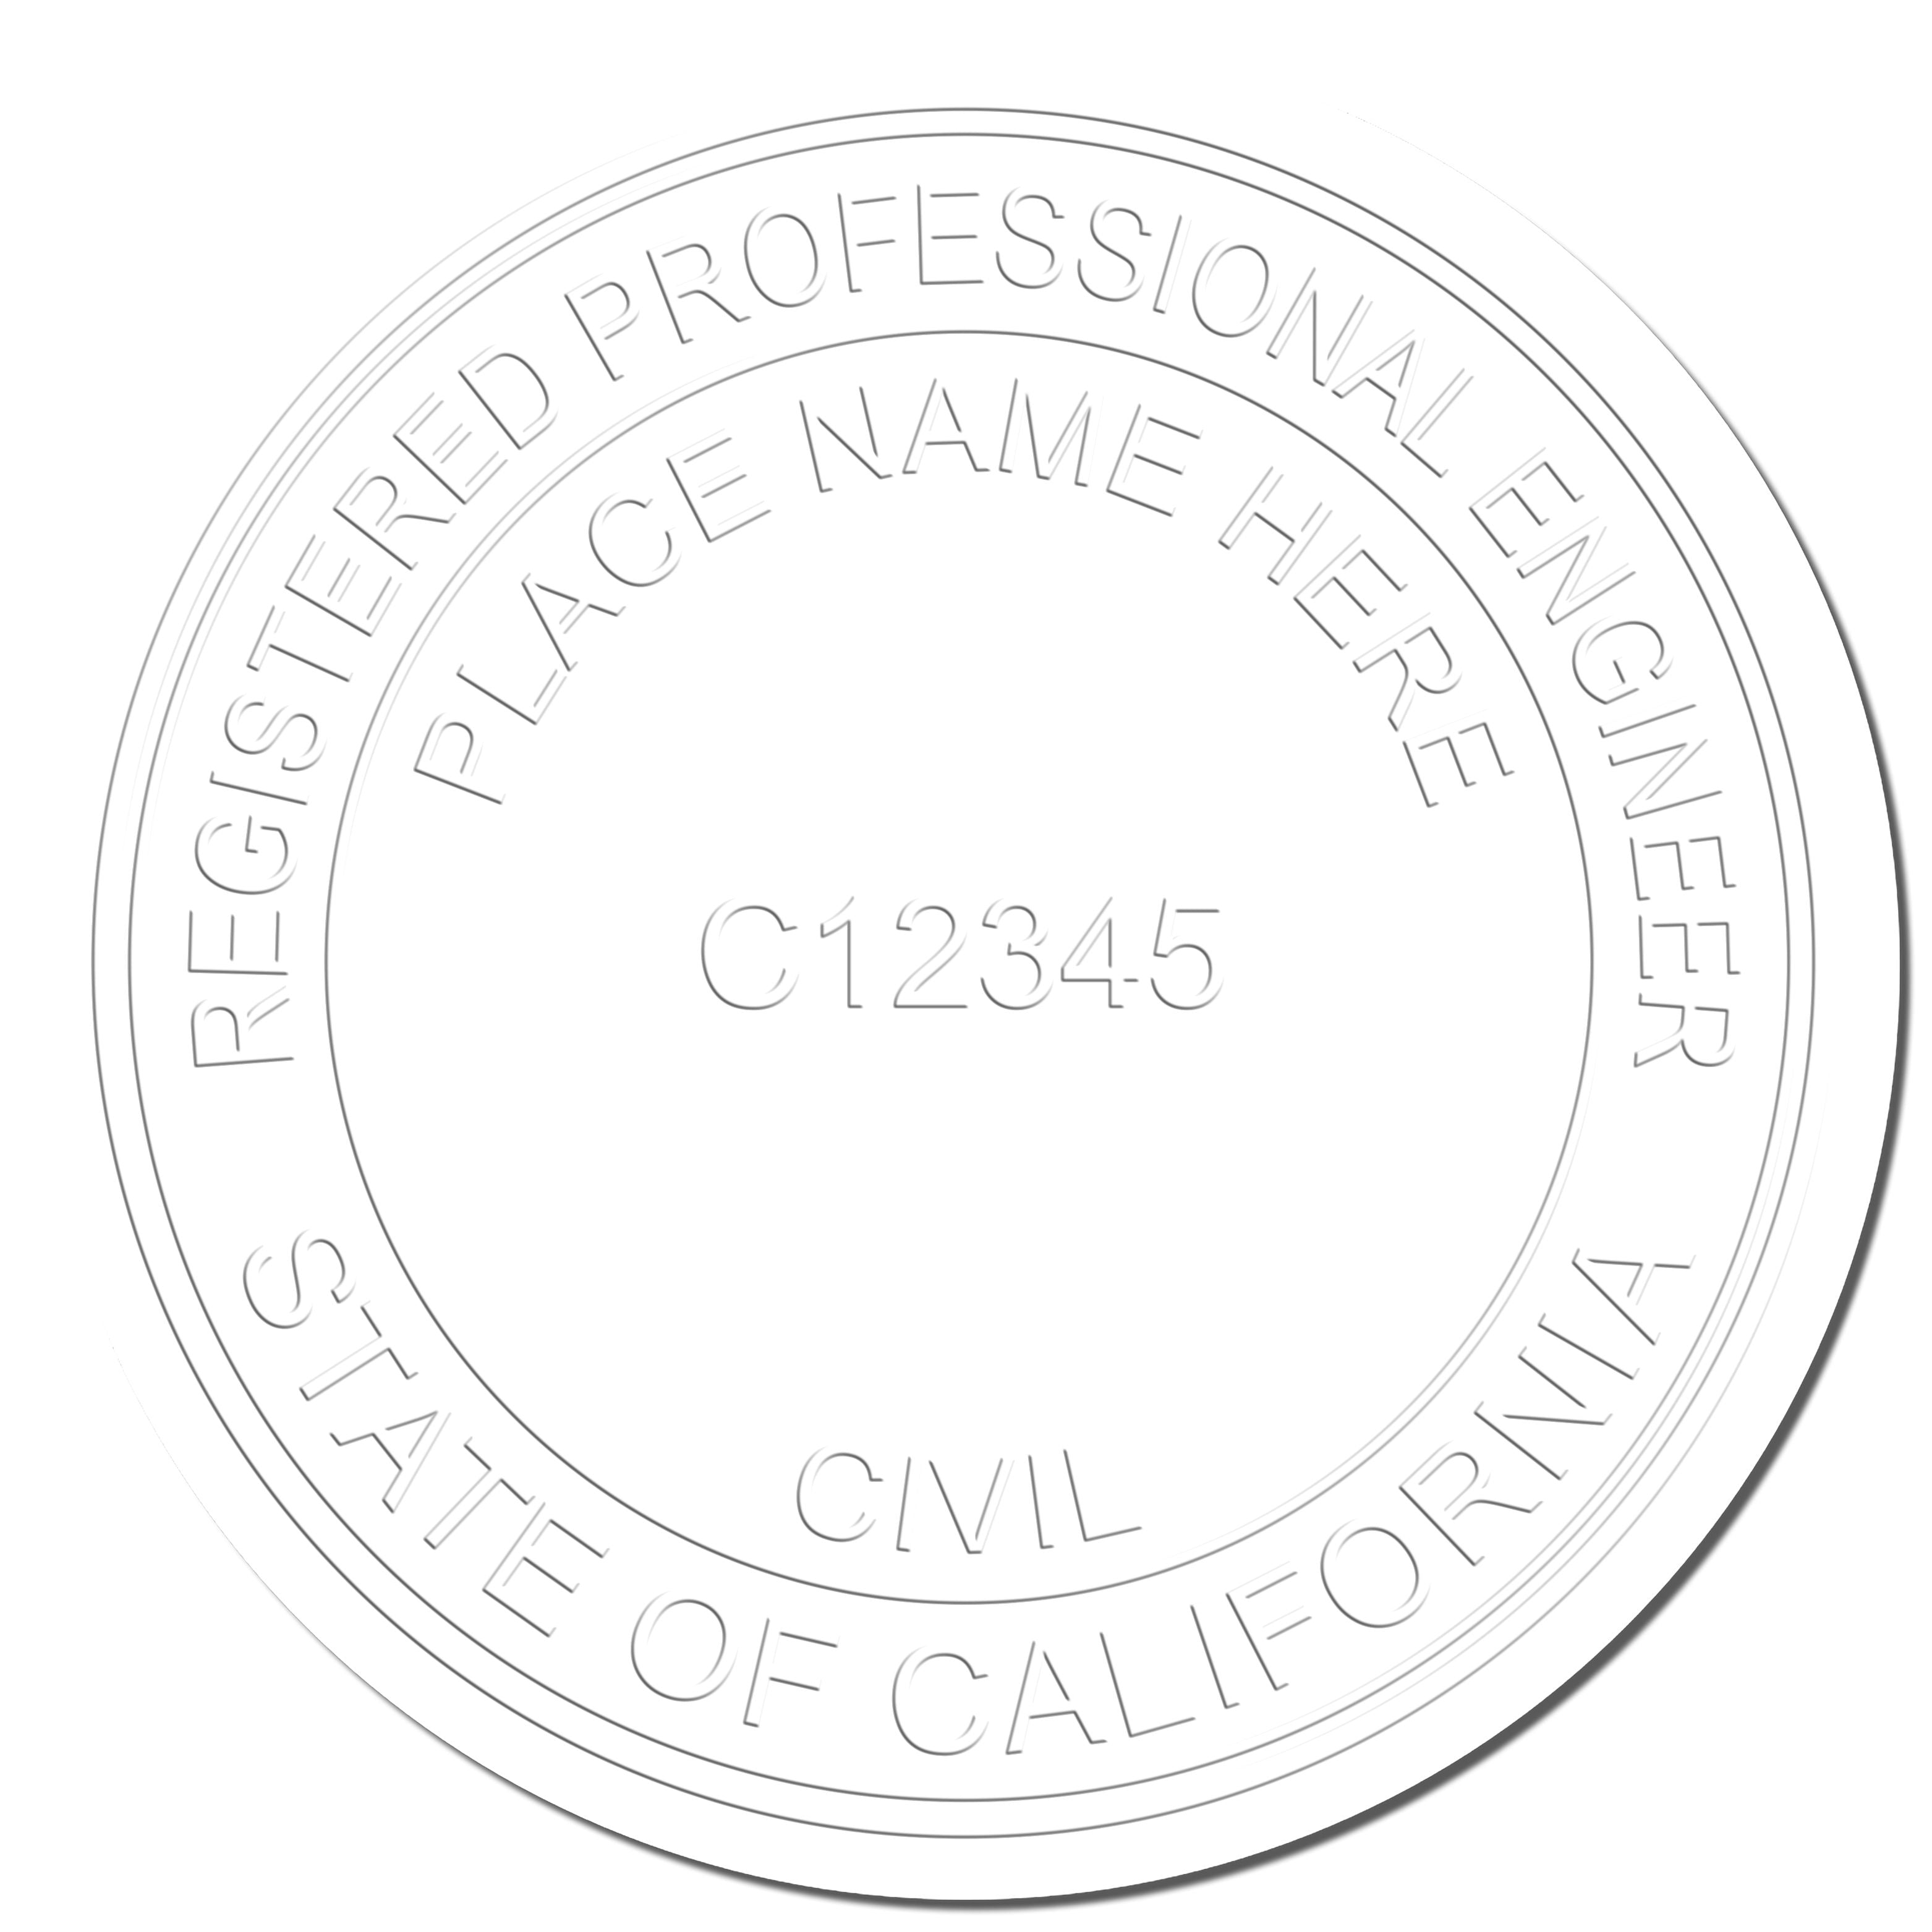 The Soft California Professional Engineer Seal stamp impression comes to life with a crisp, detailed photo on paper - showcasing true professional quality.